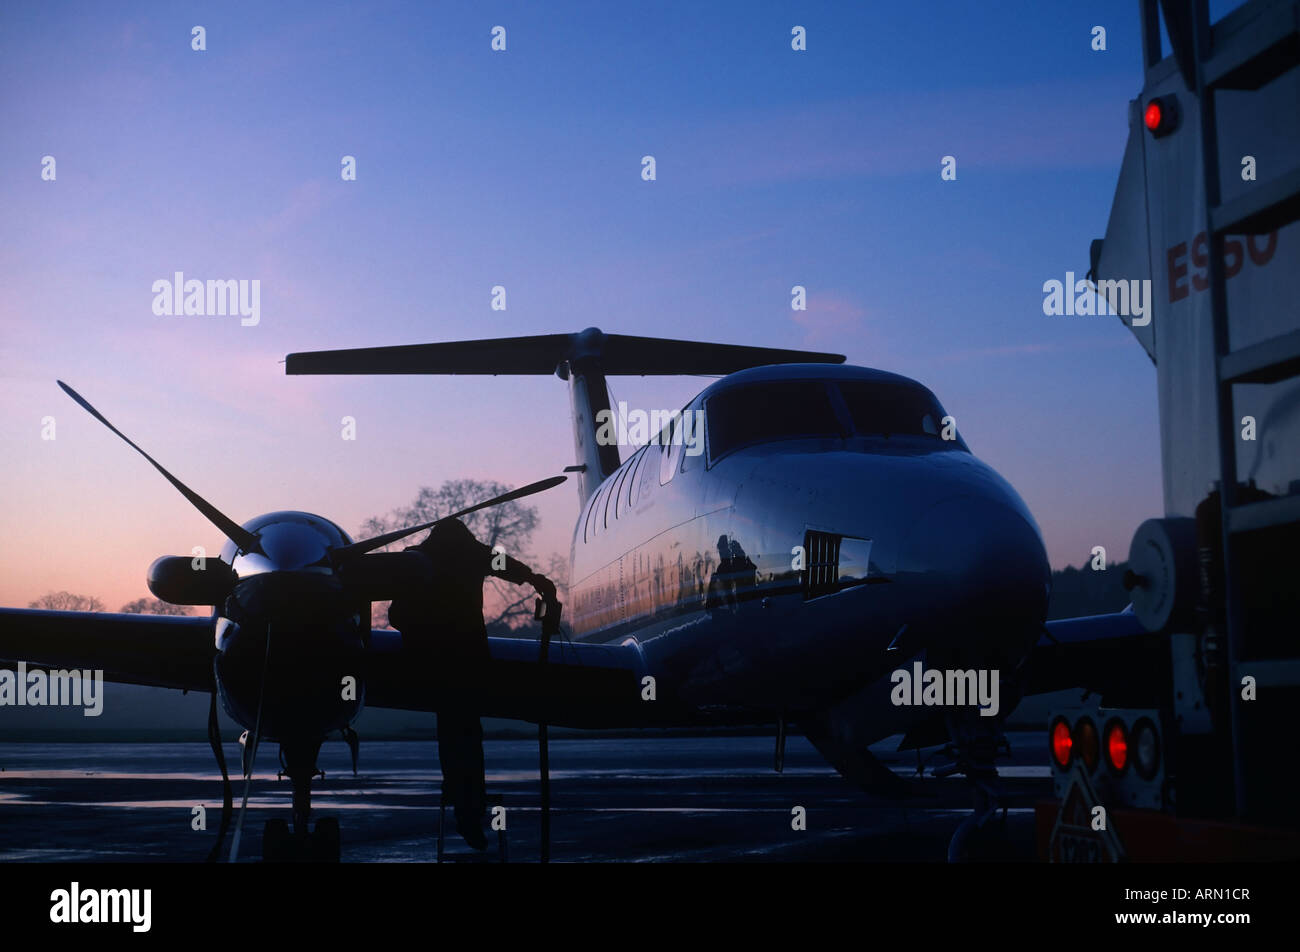 Beech 200 turbo aircraft being refueled at dawn, Victoria International Airport, Vancouver Island, British Columbia, Canada. Stock Photo